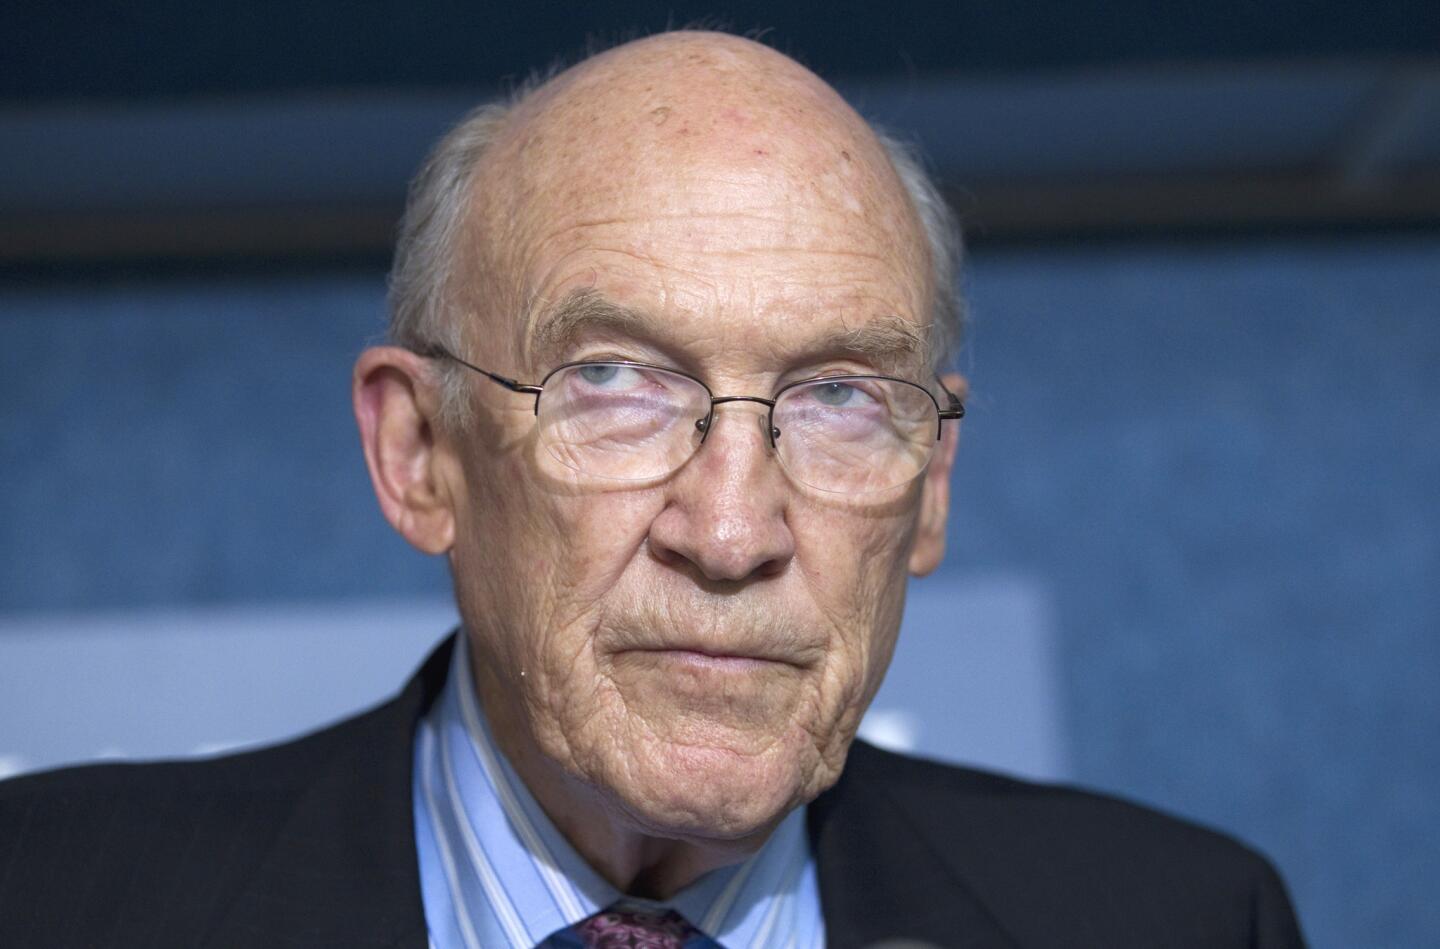 A group of Republicans, including former Sen. Alan Simpson (R-Wyo.), voiced support in March for legalizing gay marriage in Utah and Oklahoma, arguing that allowing same-sex unions is consistent with the Western conservative values of freedom and liberty championed by President Reagan and former Sen. Barry Goldwater (R-Ariz.).